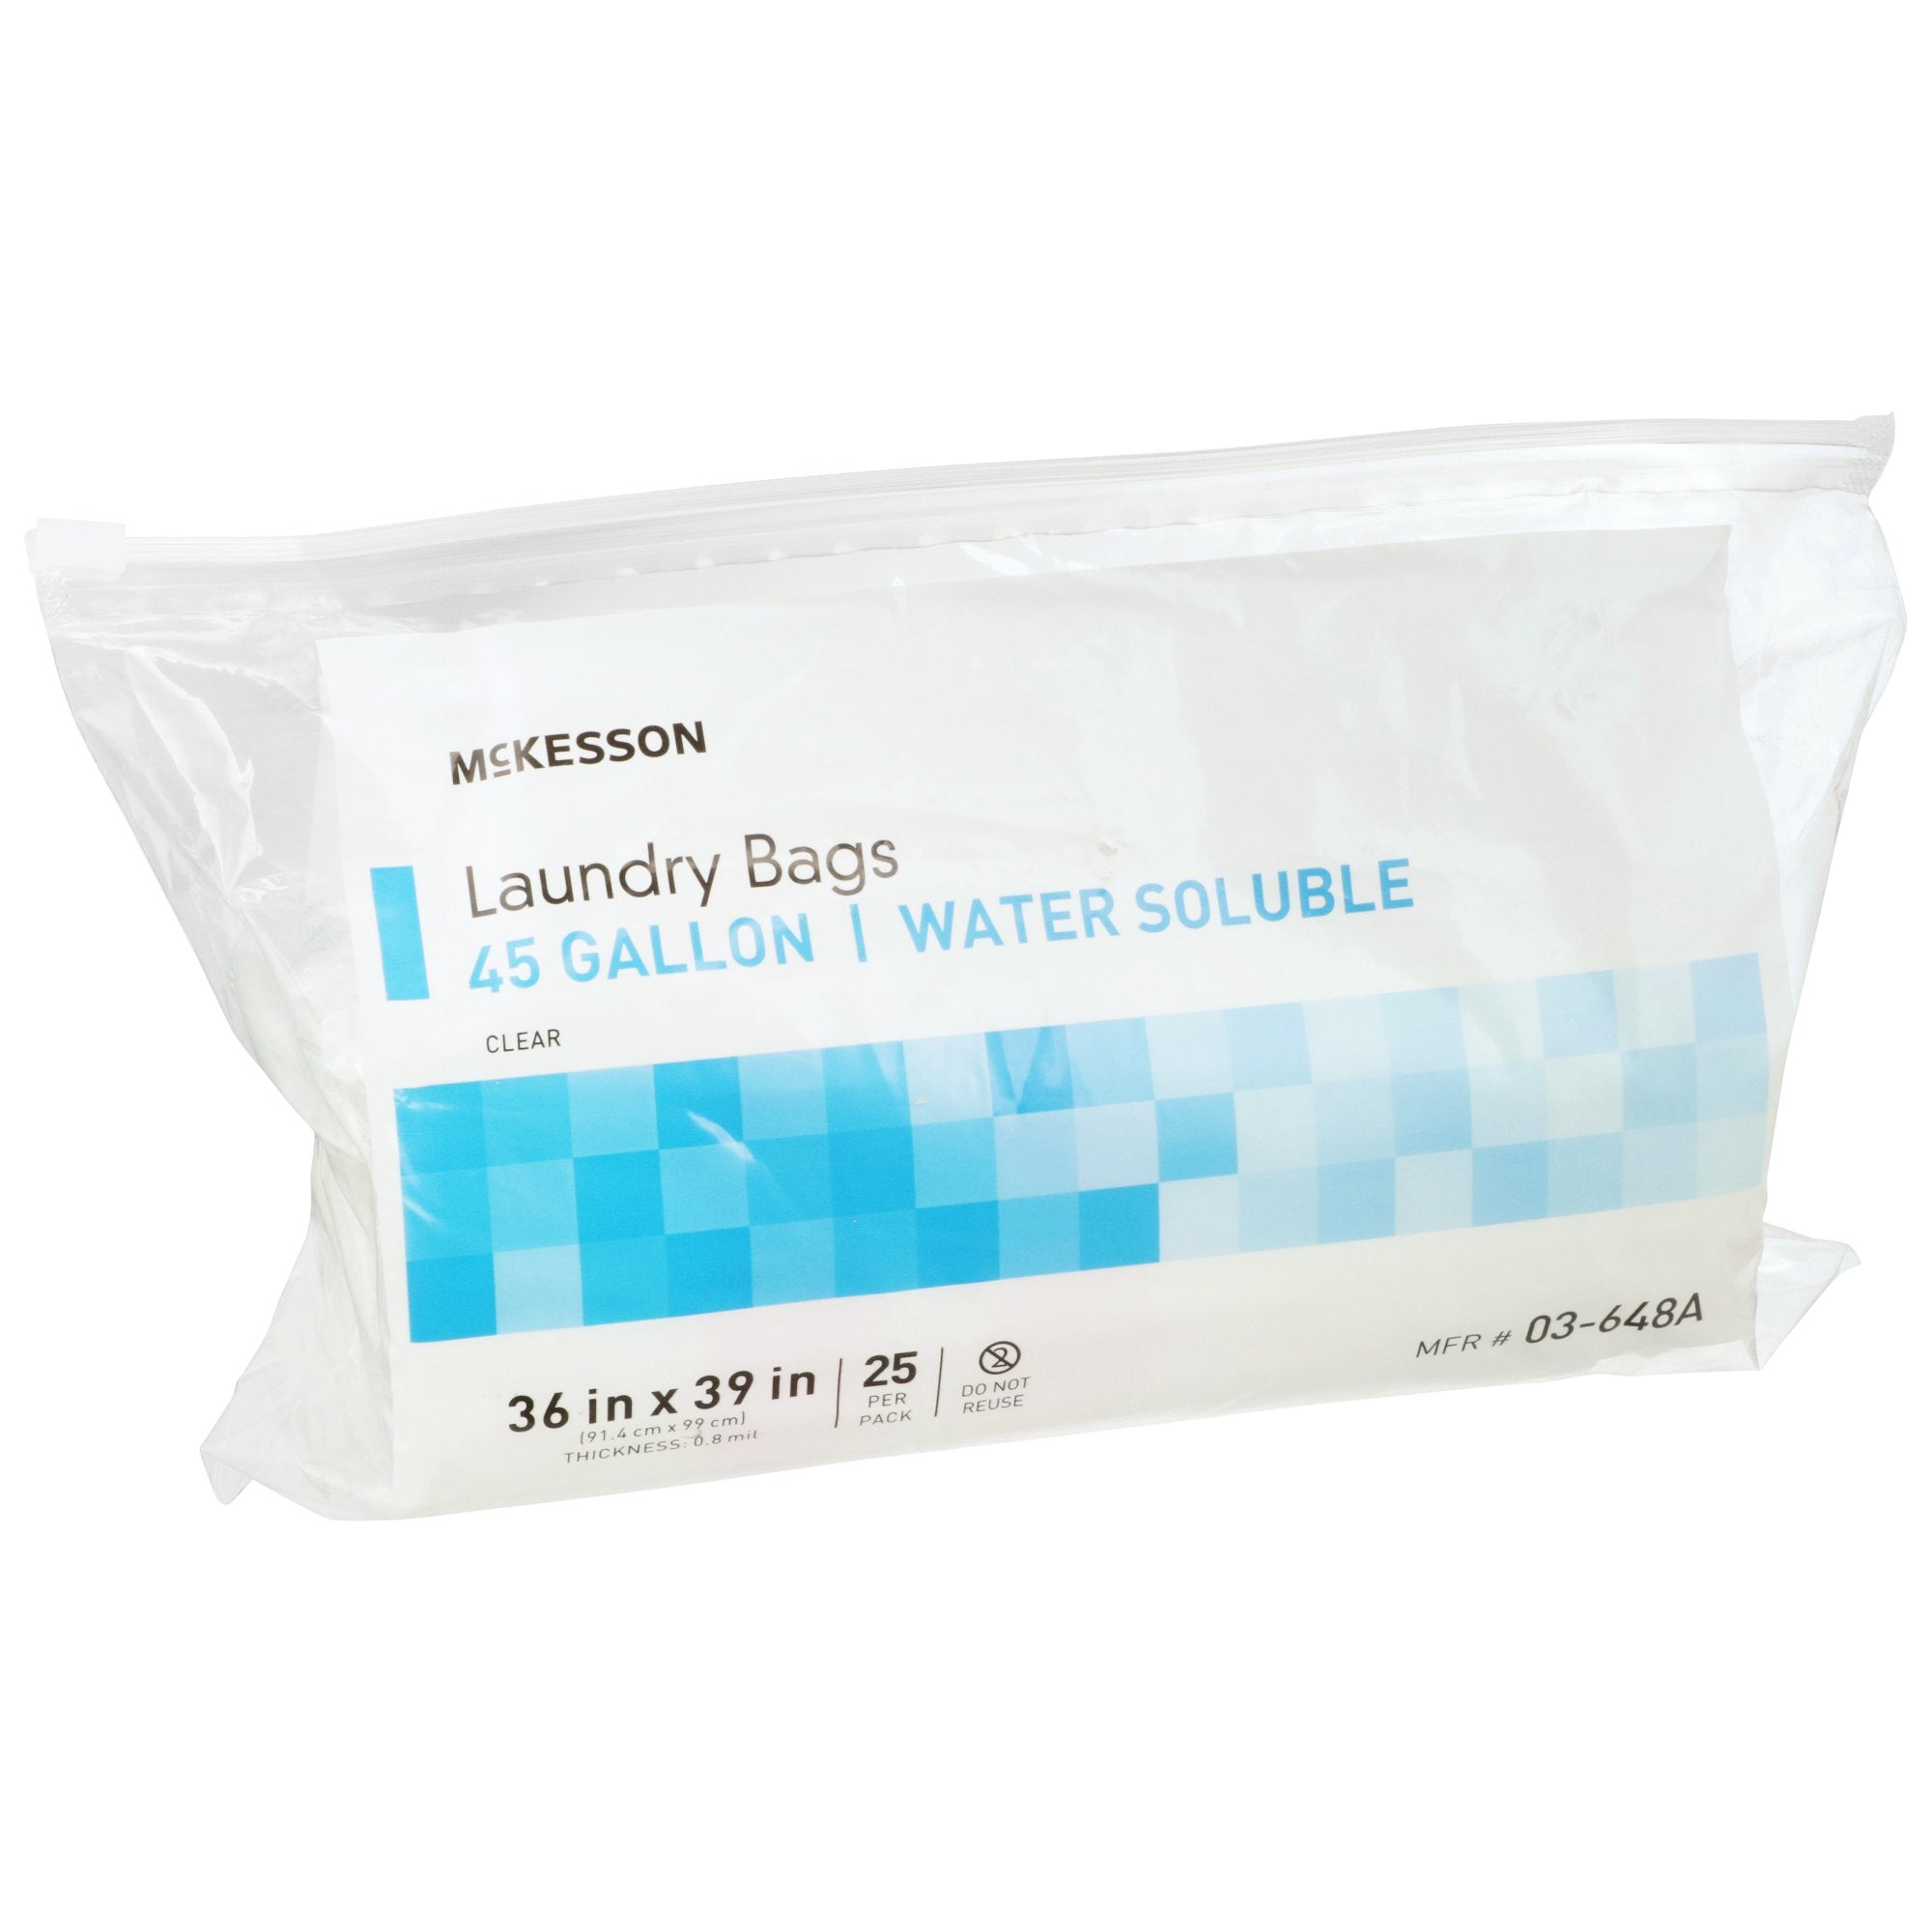 McKesson Water Soluble Laundry Bag, 40-45 gal Capacity (100 Units)